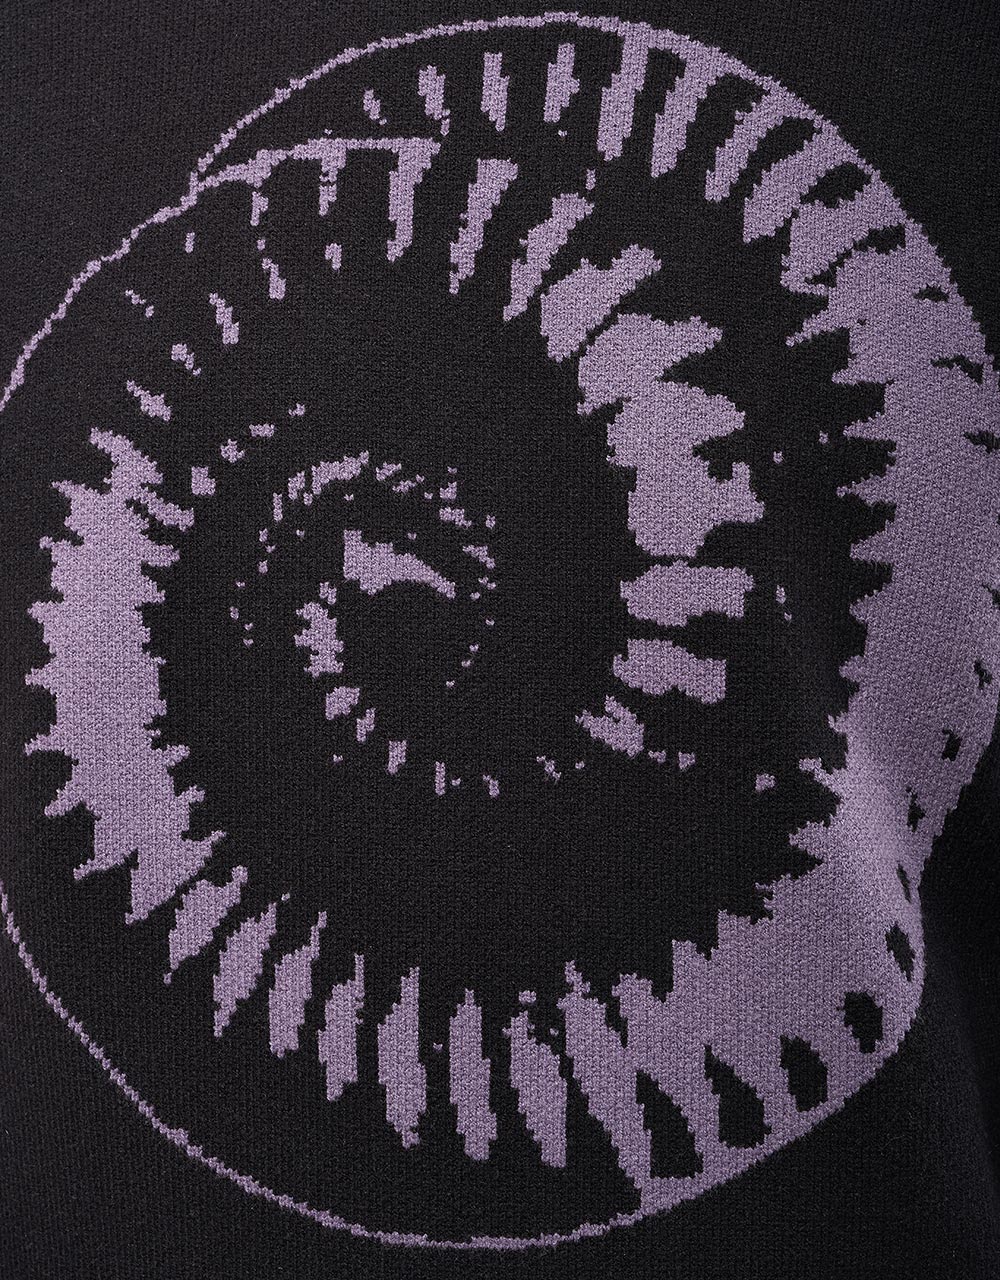 Welcome x Nine Inch Nails Spiral Knit Sweater - Black